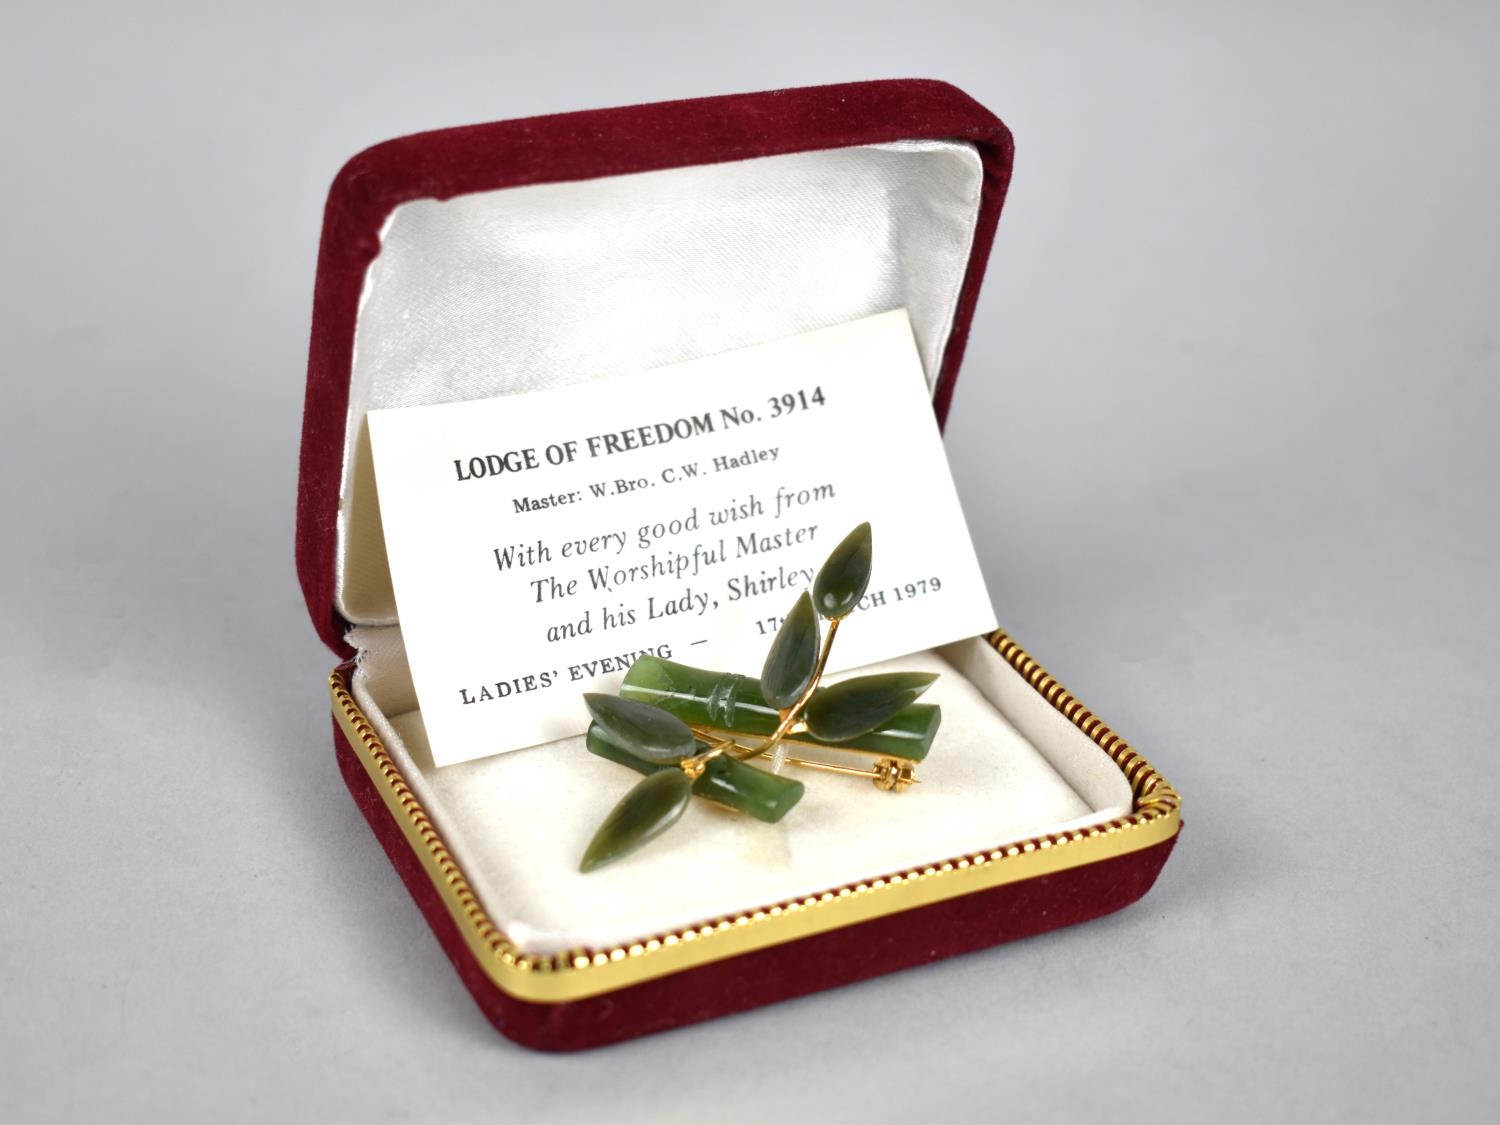 A Jadeite and Gilt Metal Vintage Brooch, In Box with Presentation Card Inscribed for 'Lodge of